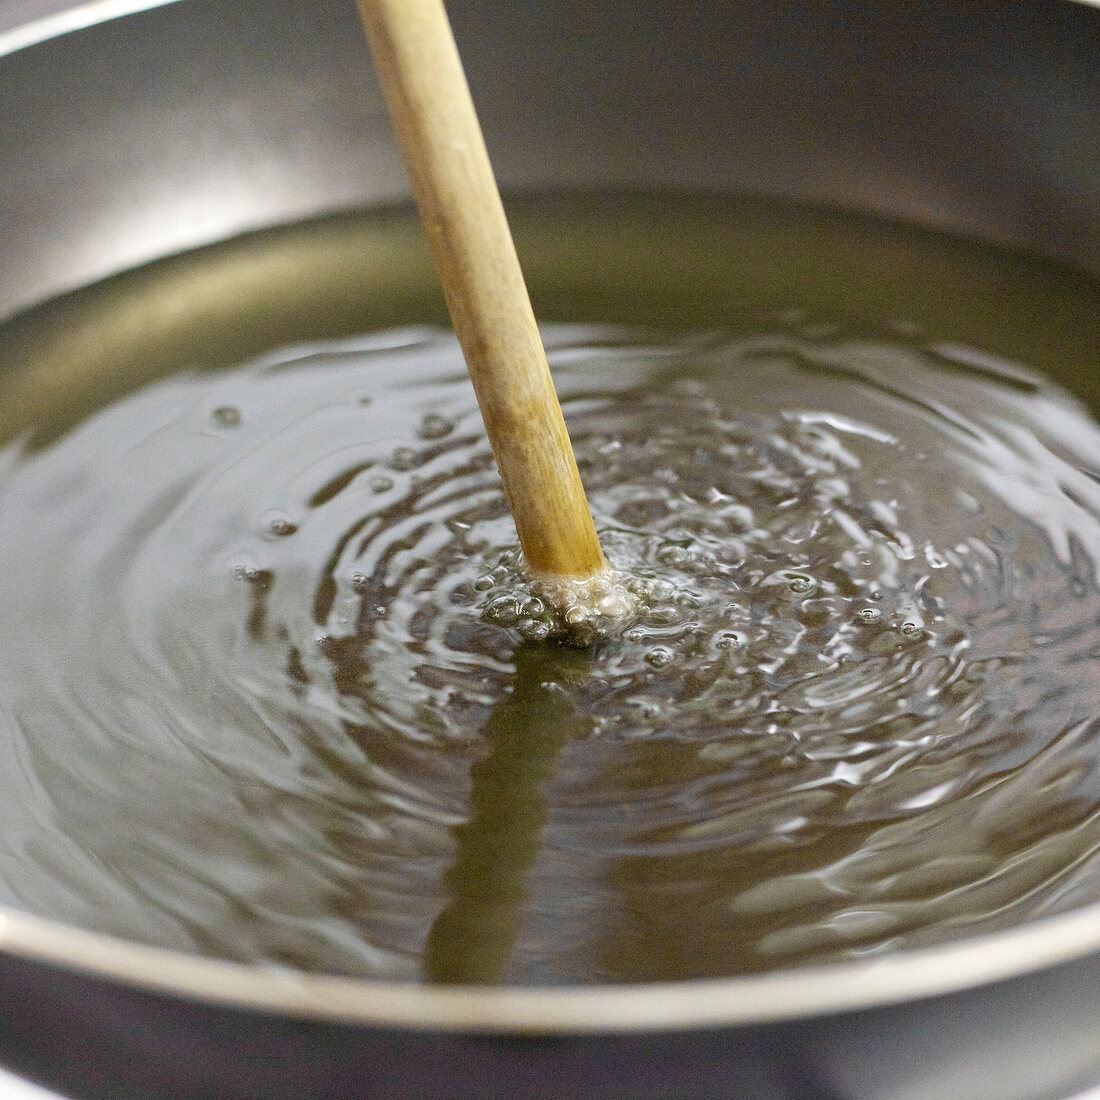 Close-up of wooden spoon dipped in oil to measure temperature, step 3